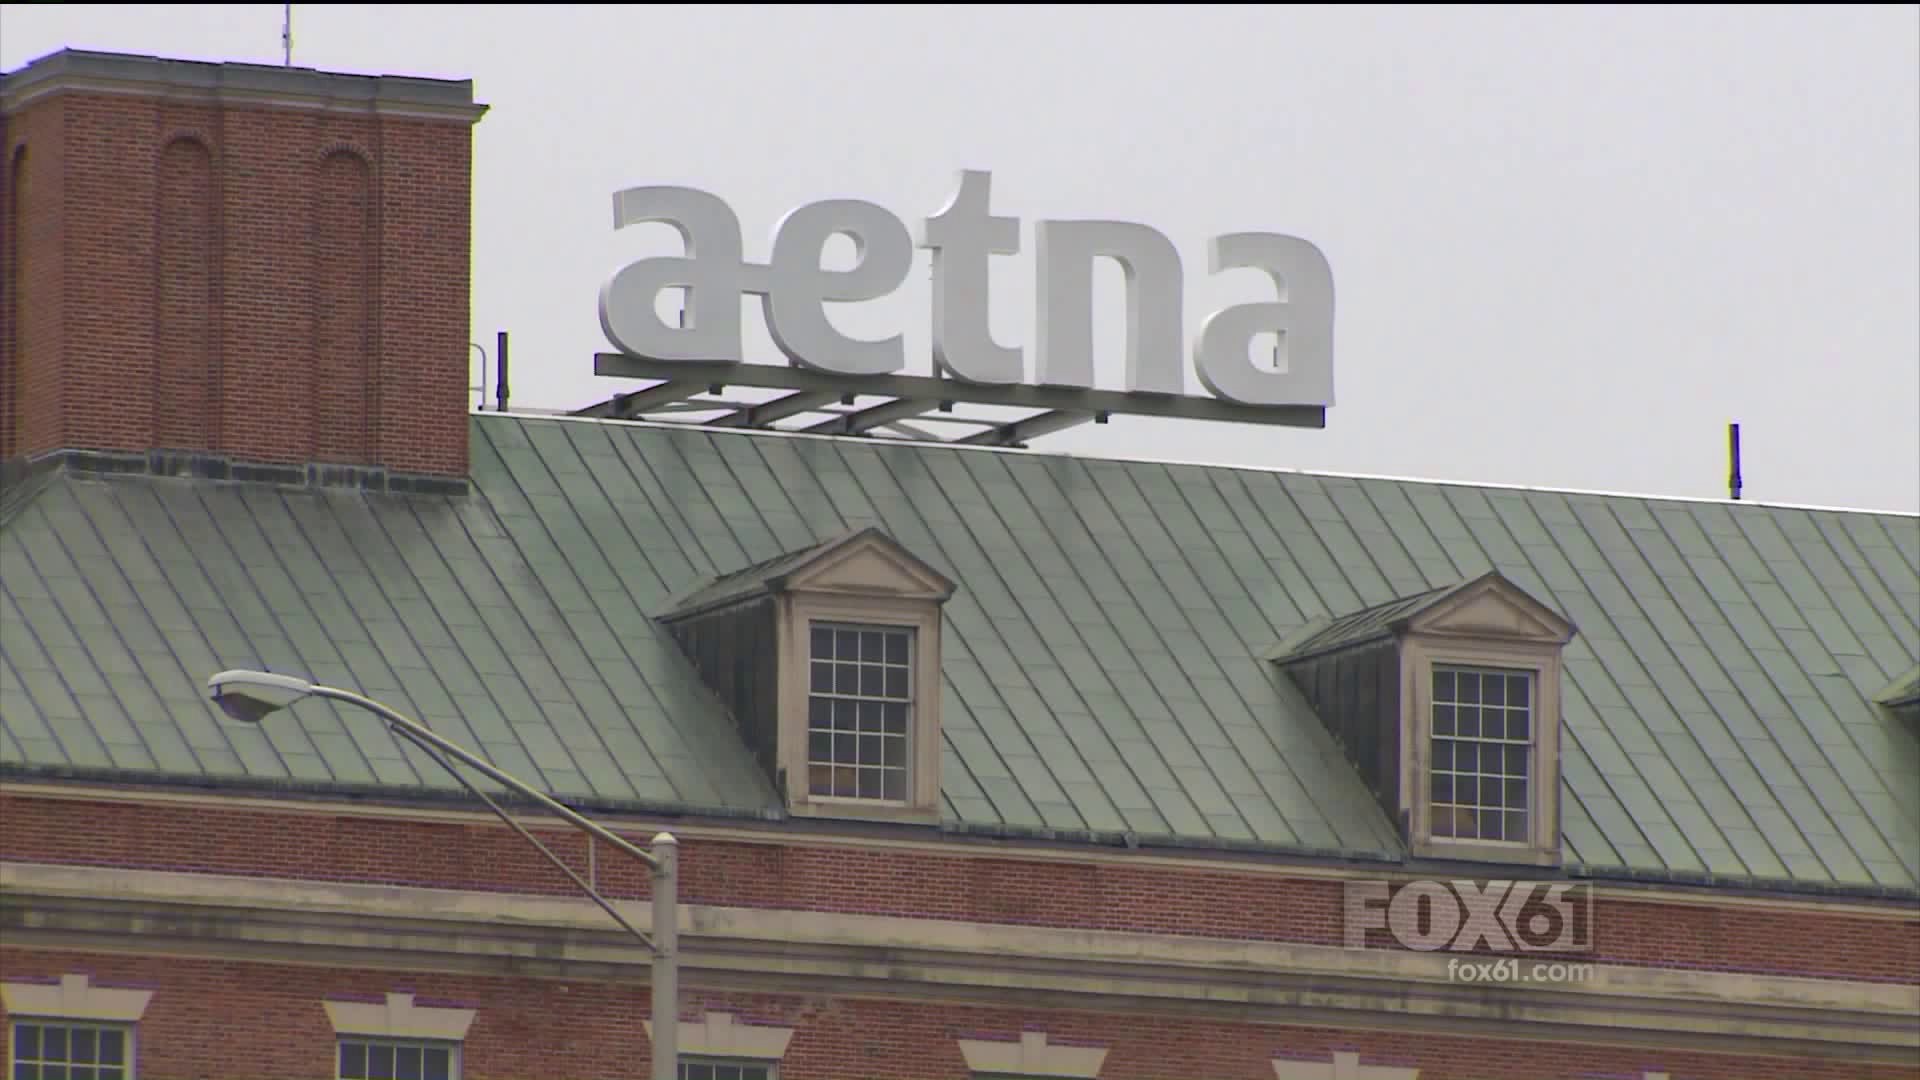 The Real Story - Aetna execs leaving town